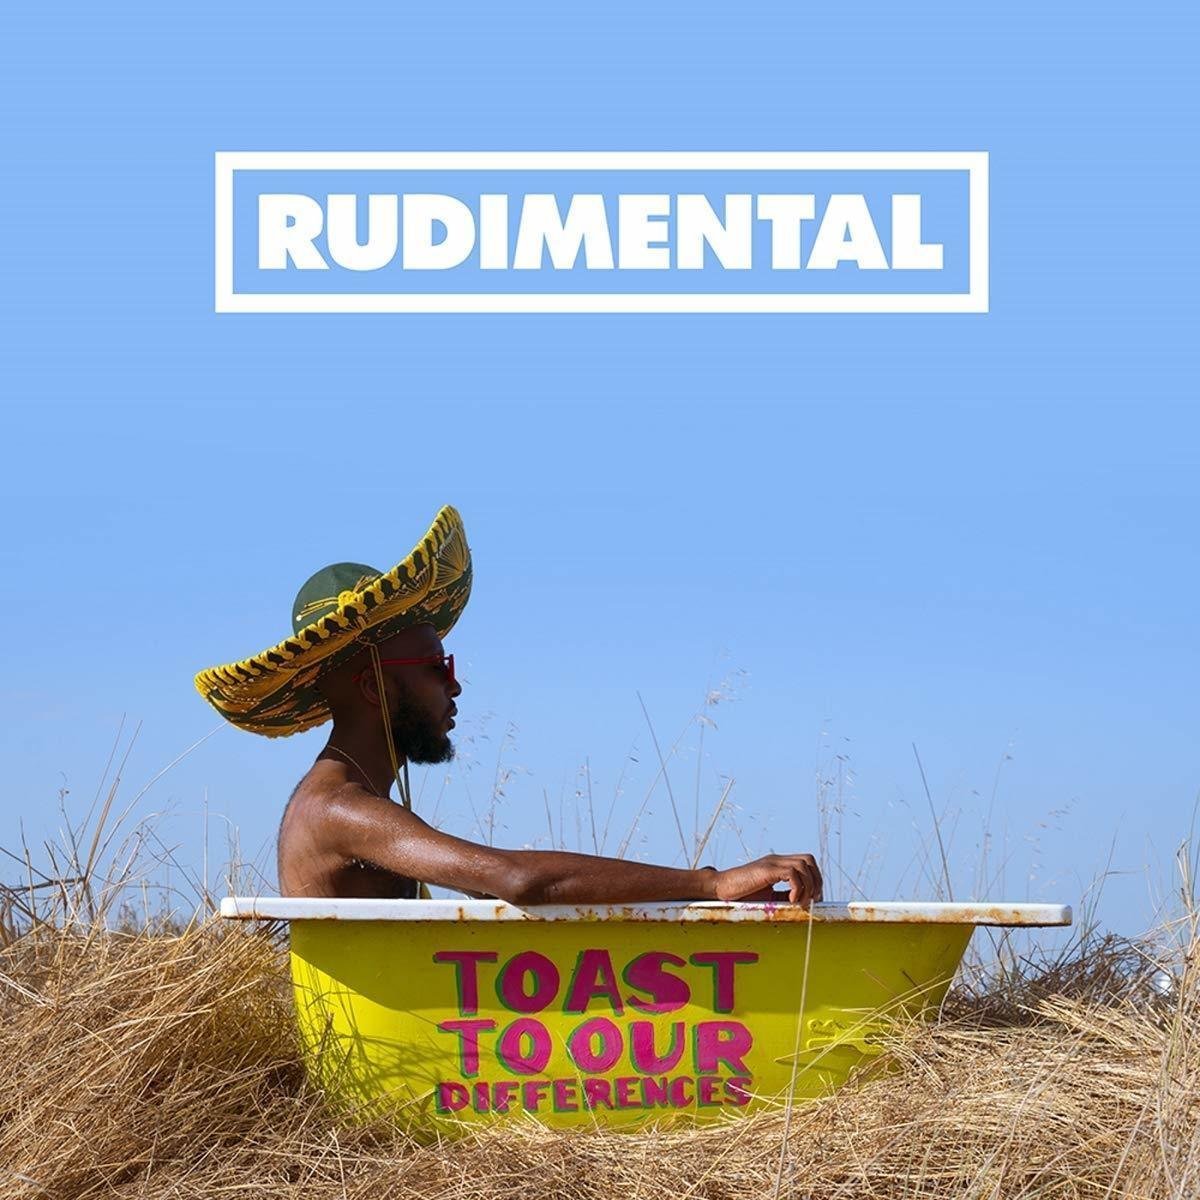 Vinylplade Rudimental - Toast To Our Differences (LP)